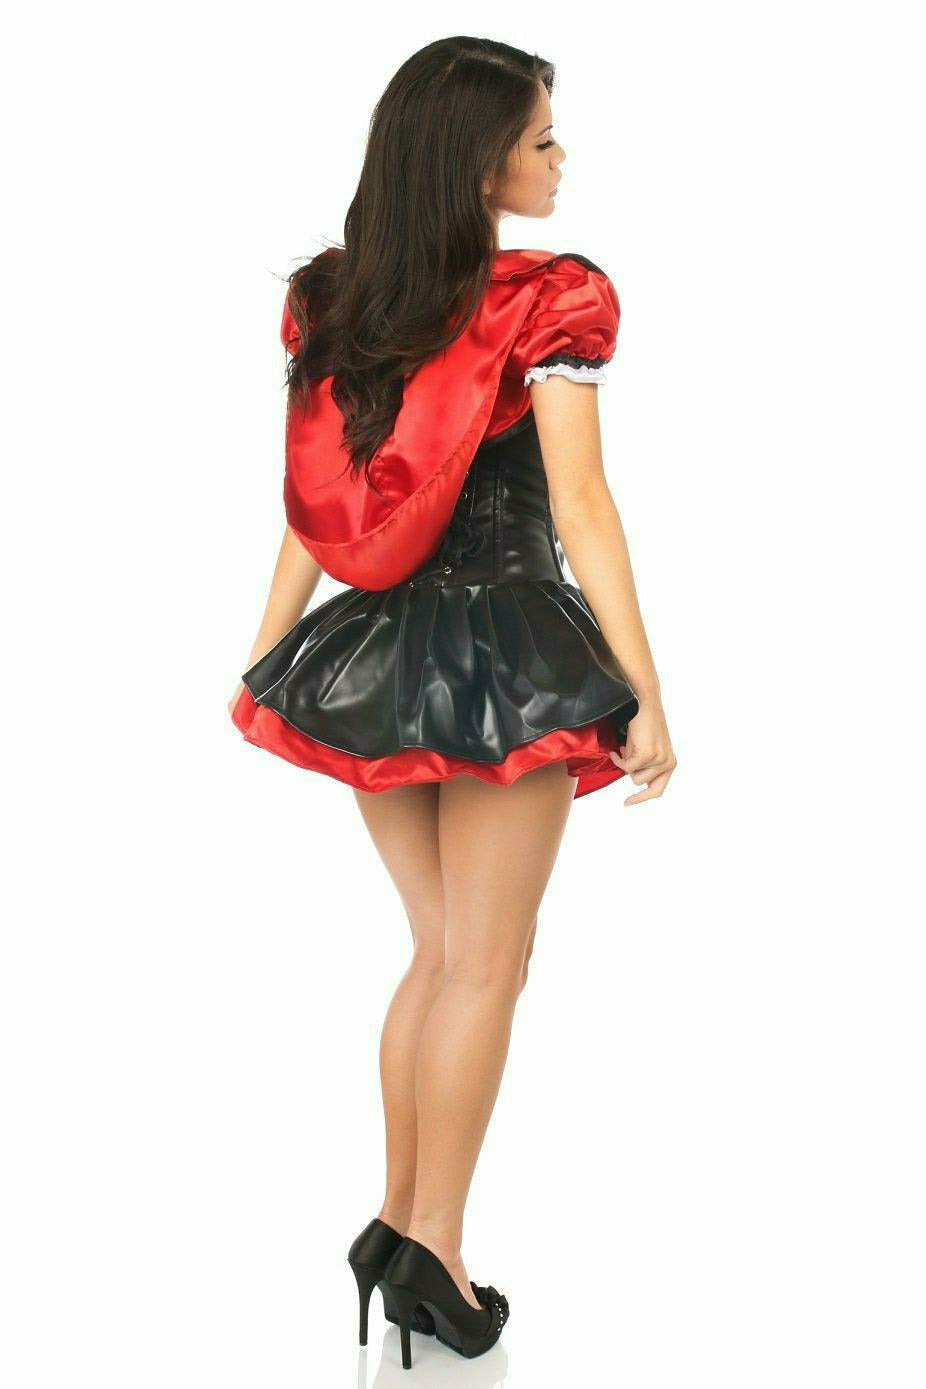 Daisy Corsets Top Drawer Premium Red Riding Hood Corset Dress Costume